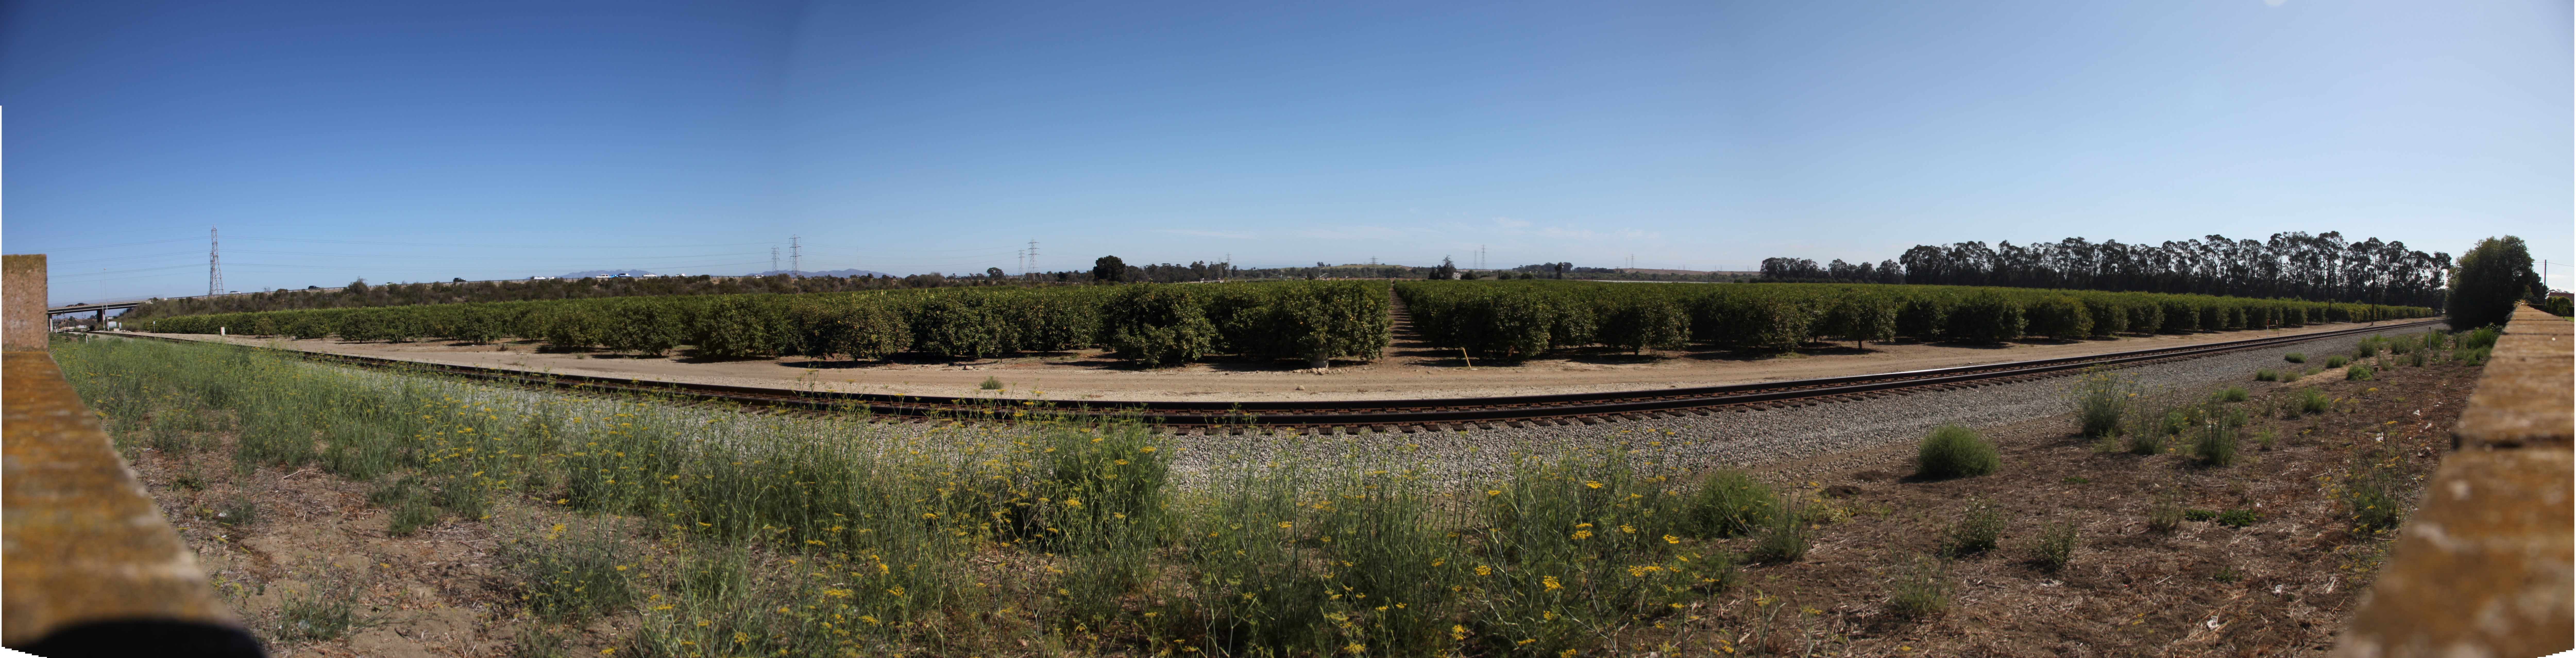 Train tracks and orchards across the cemetery wall at Ivy Lawn Memorial Park in Ventura, CA.